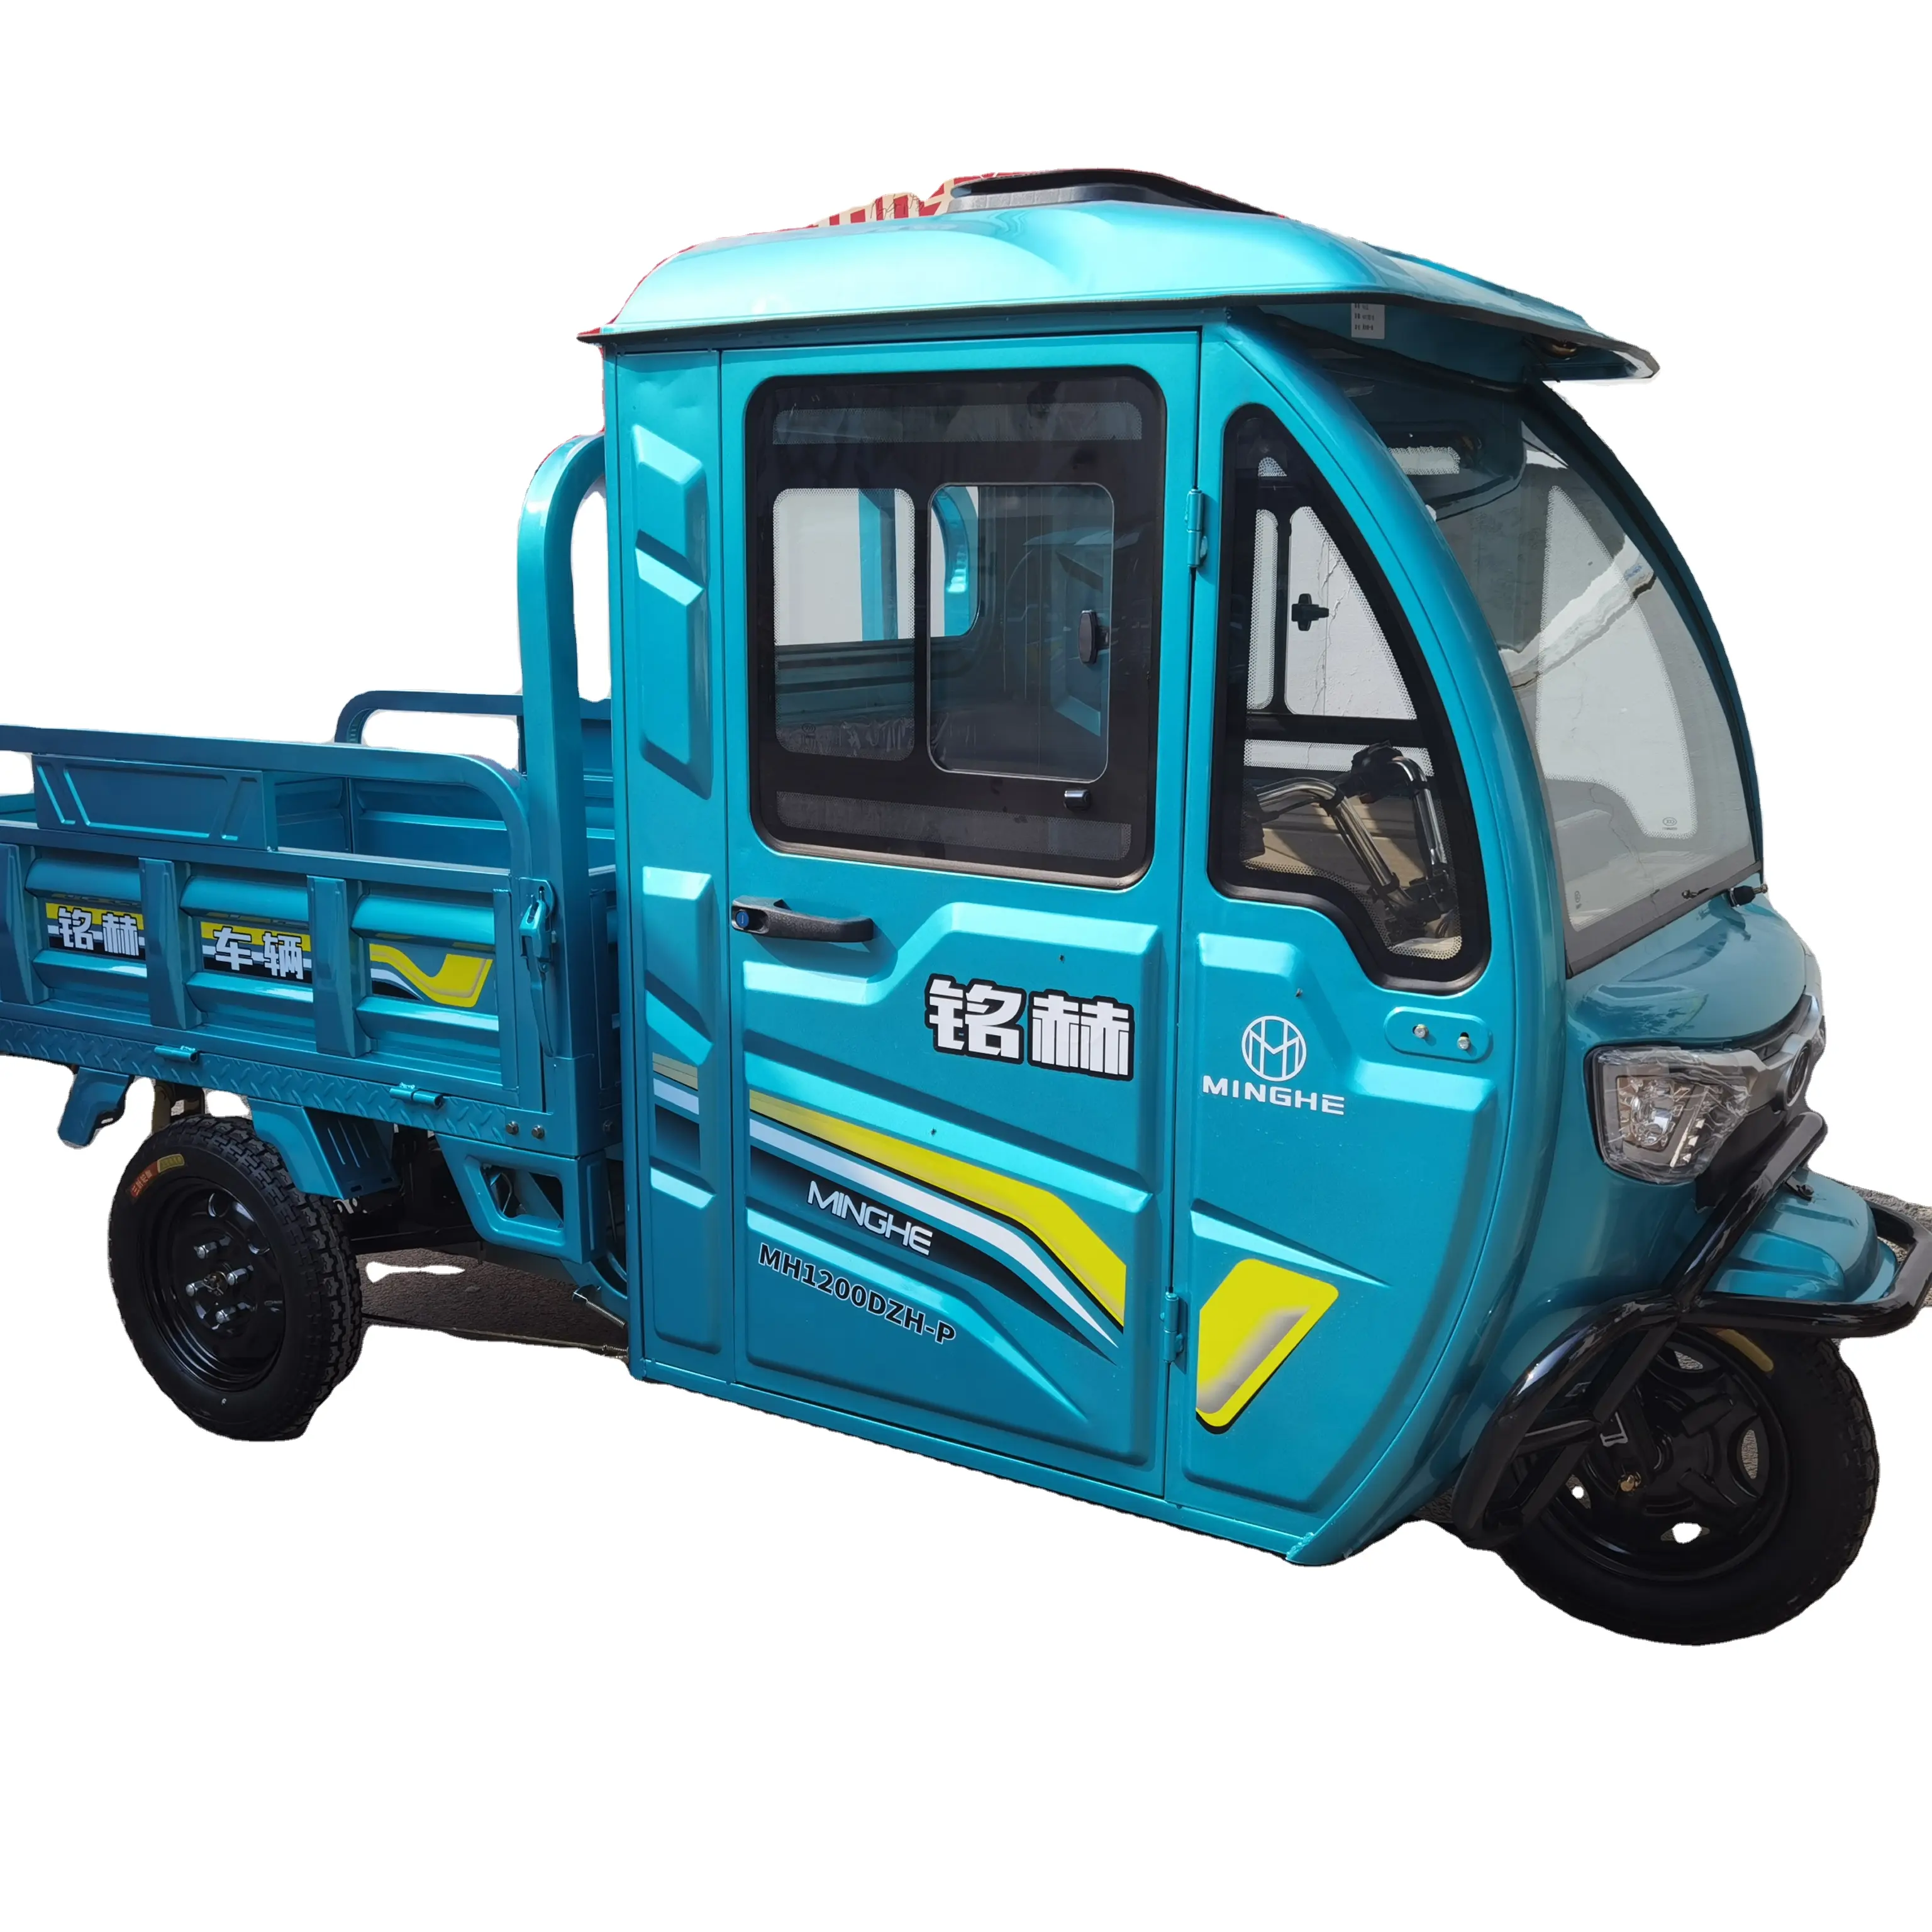 New rickshaw battery electric tricycle portable 1500 watts 60 km/h cargo